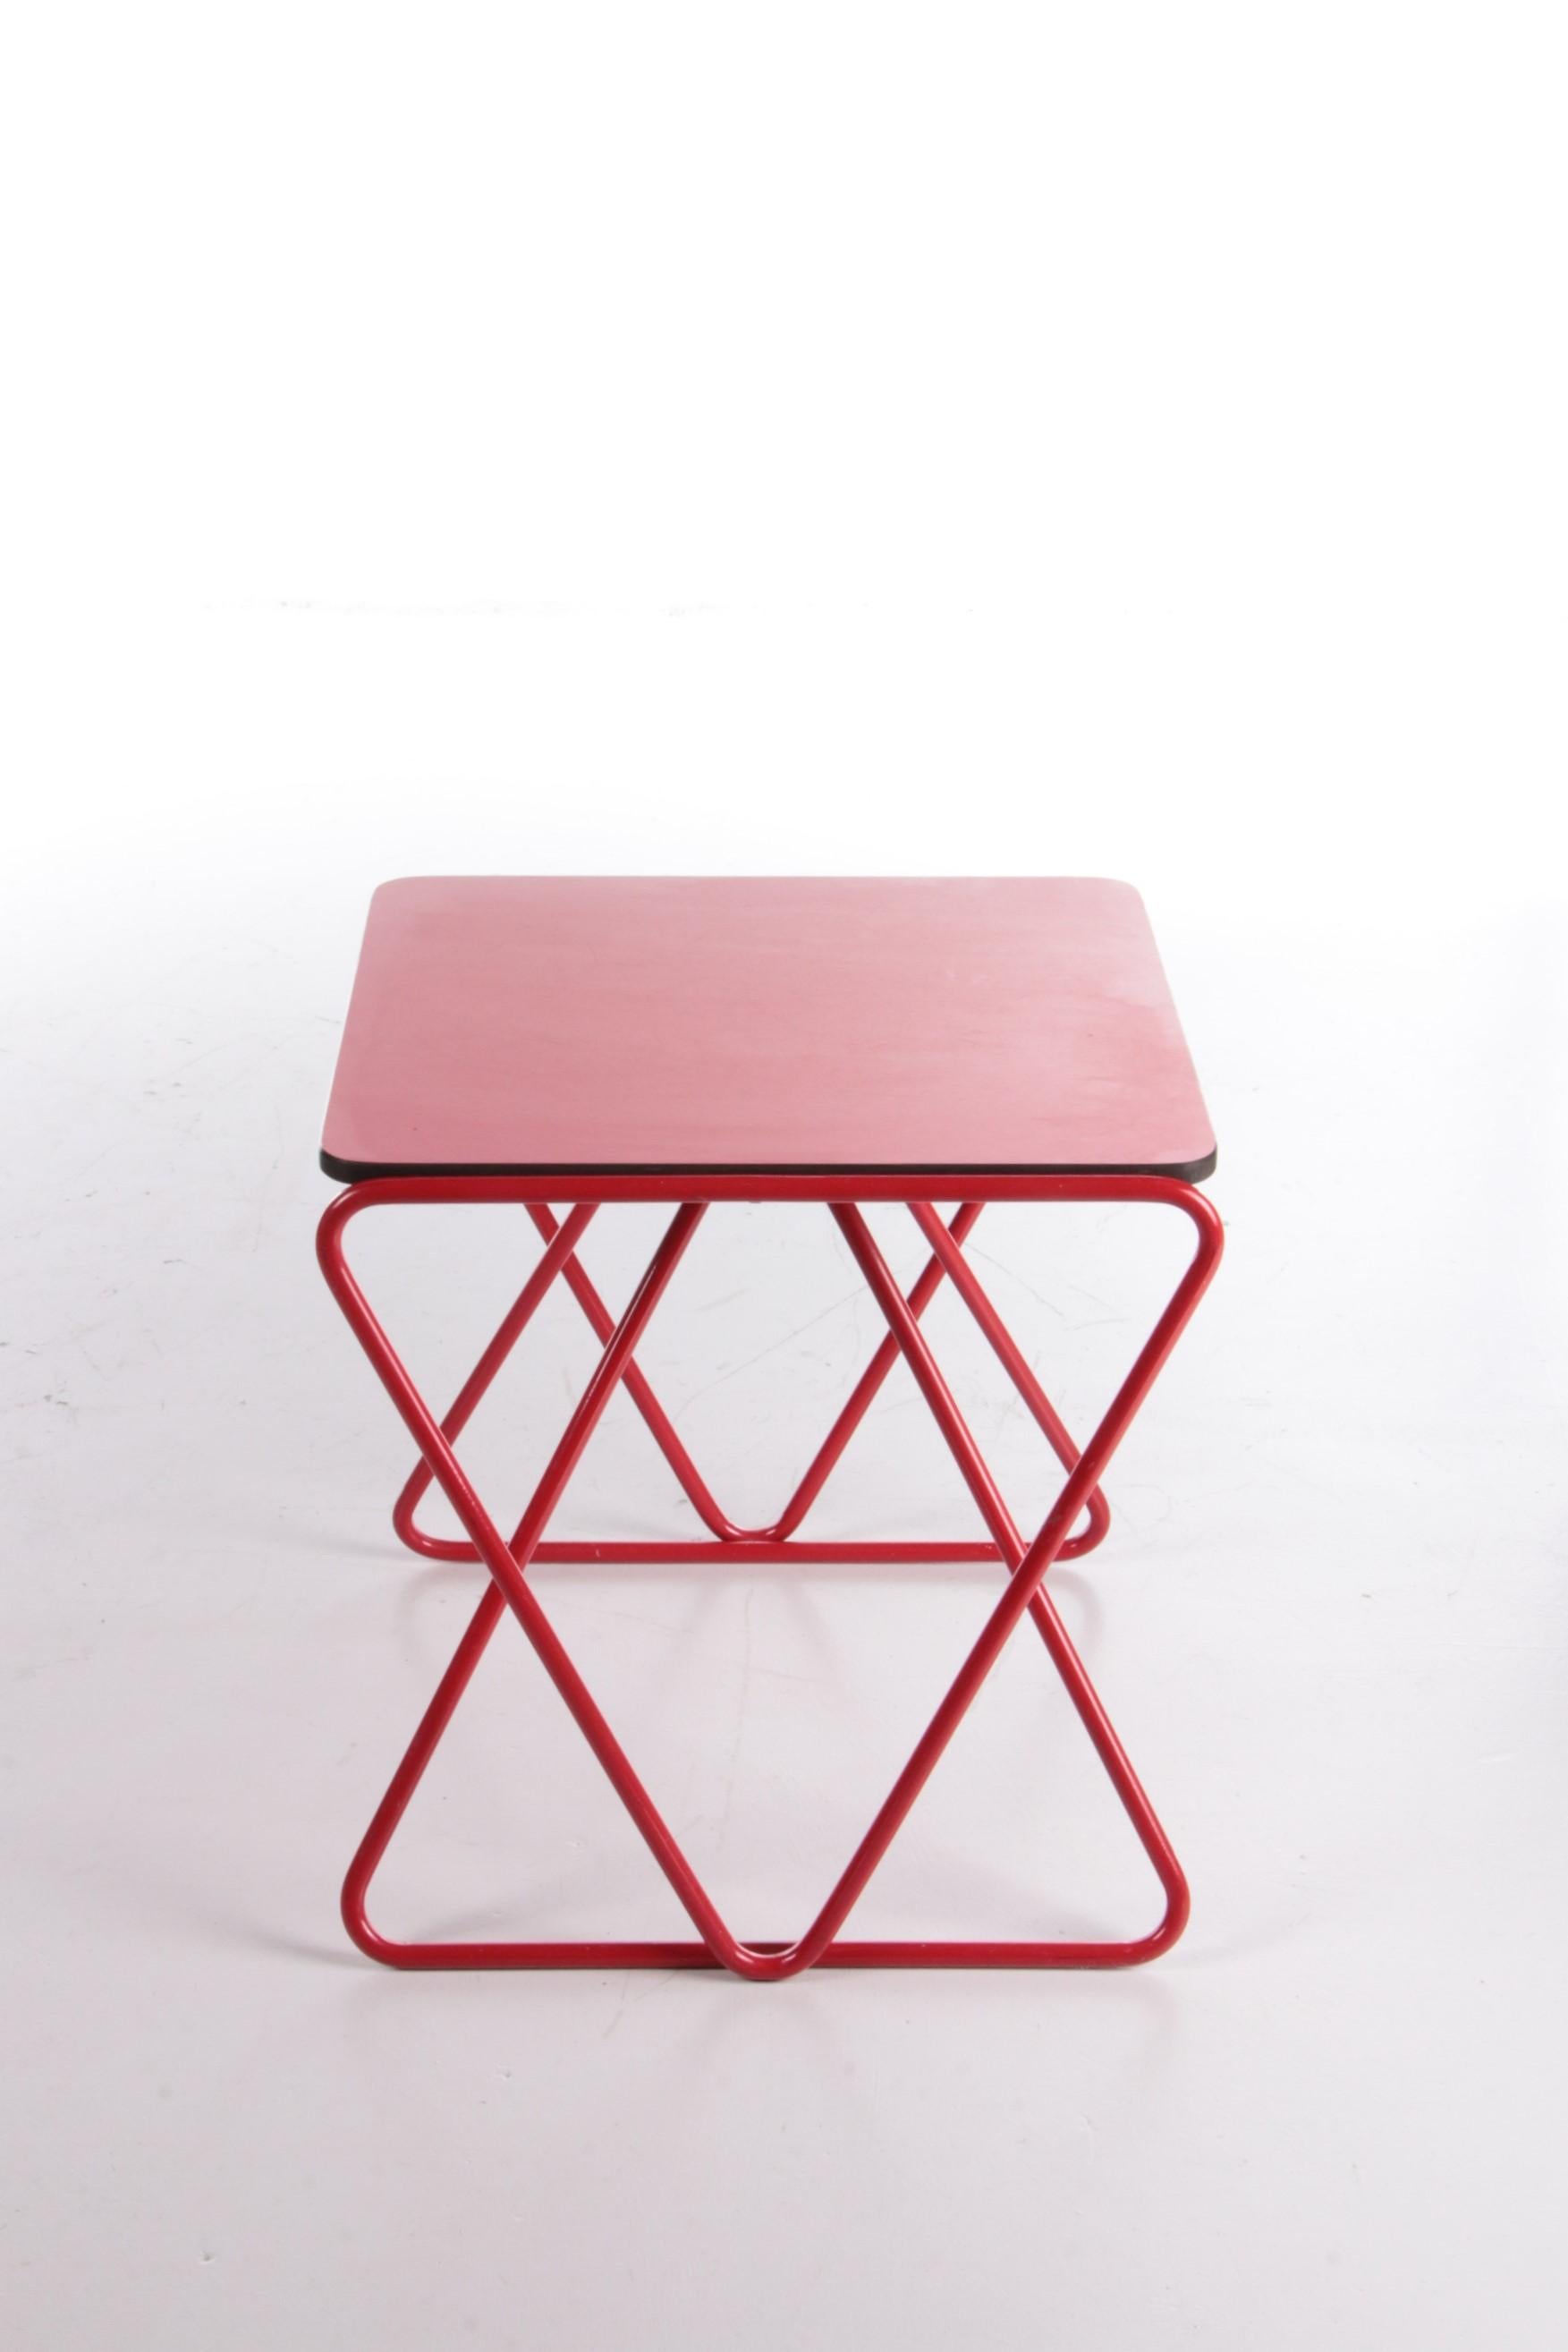 Late 20th Century Rare Side Table Designed by Walter Antonis for I-Form, Holland, 1978 For Sale